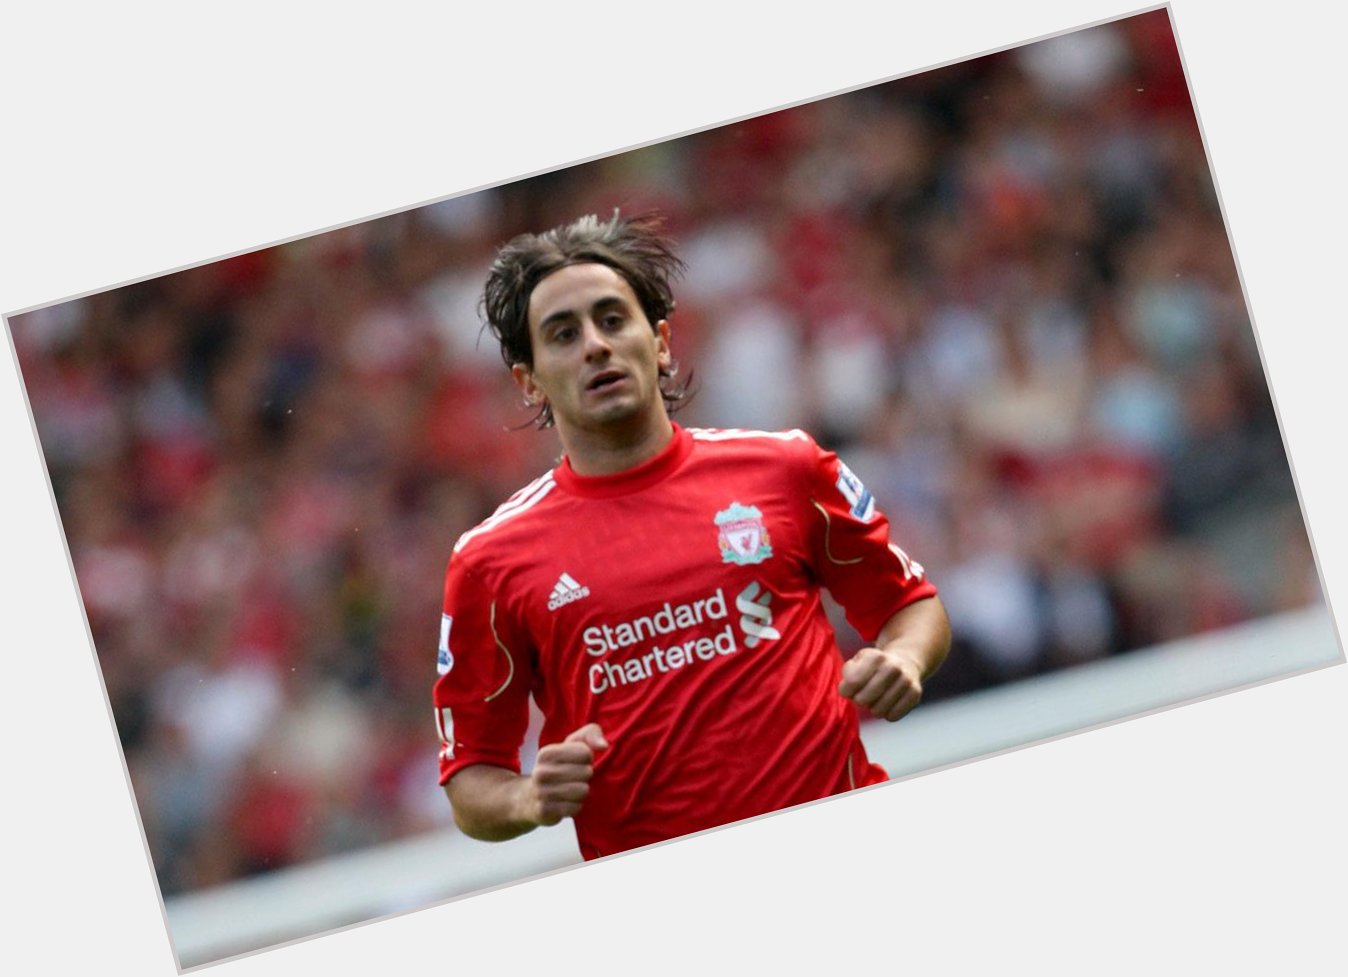 Happy 31st birthday to former midfielder Alberto Aquilani. The £20 million signing made 9 Premier League starts. 